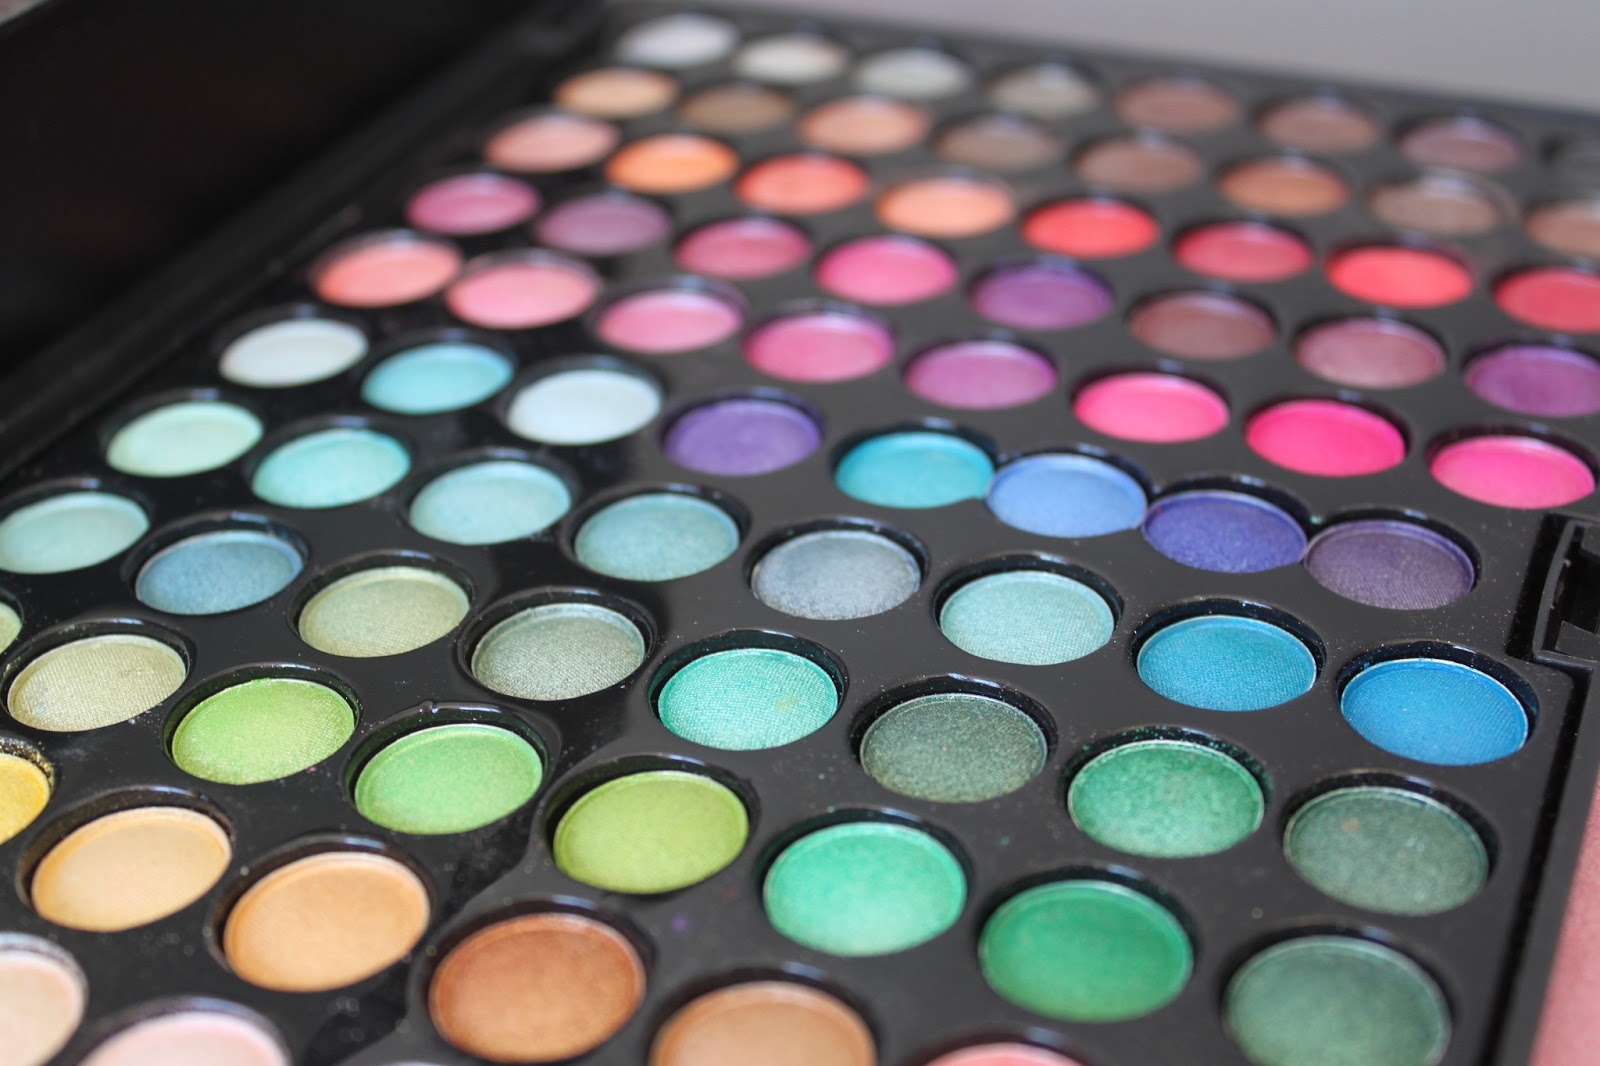 Australian Beauty Review: Coastal Scents 88 Ultra Shimmer Palette Review